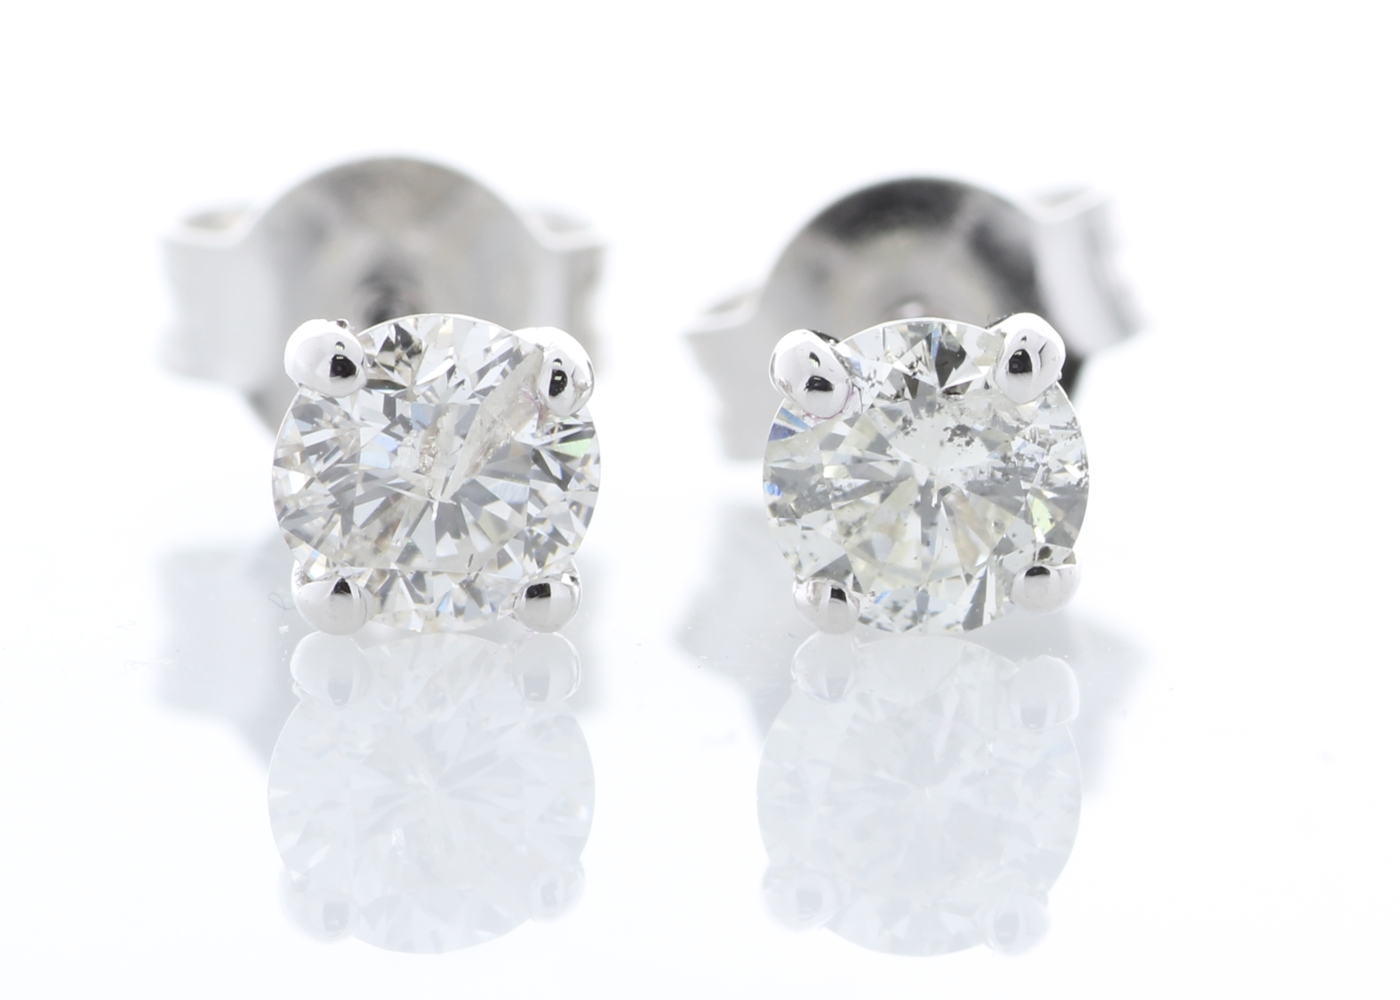 18ct White Gold Single Stone Prong Set Diamond Earring 0.80 Carats - Valued By GIE £8,550.00 - Two - Image 2 of 3